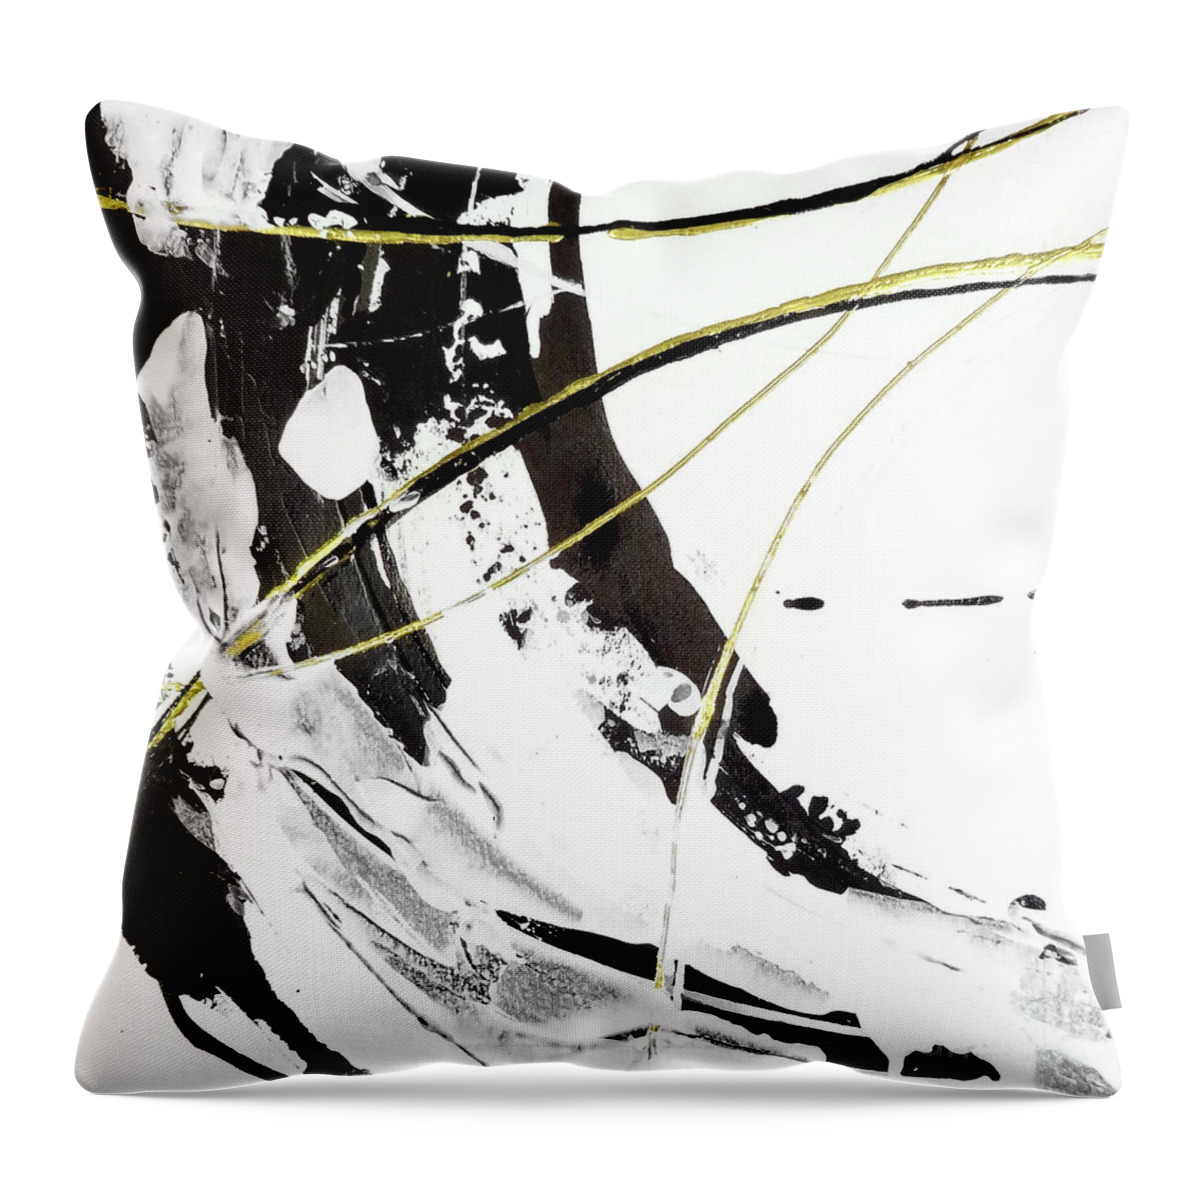 Original Watercolors Throw Pillow featuring the painting Continuum 1 by Chris Paschke